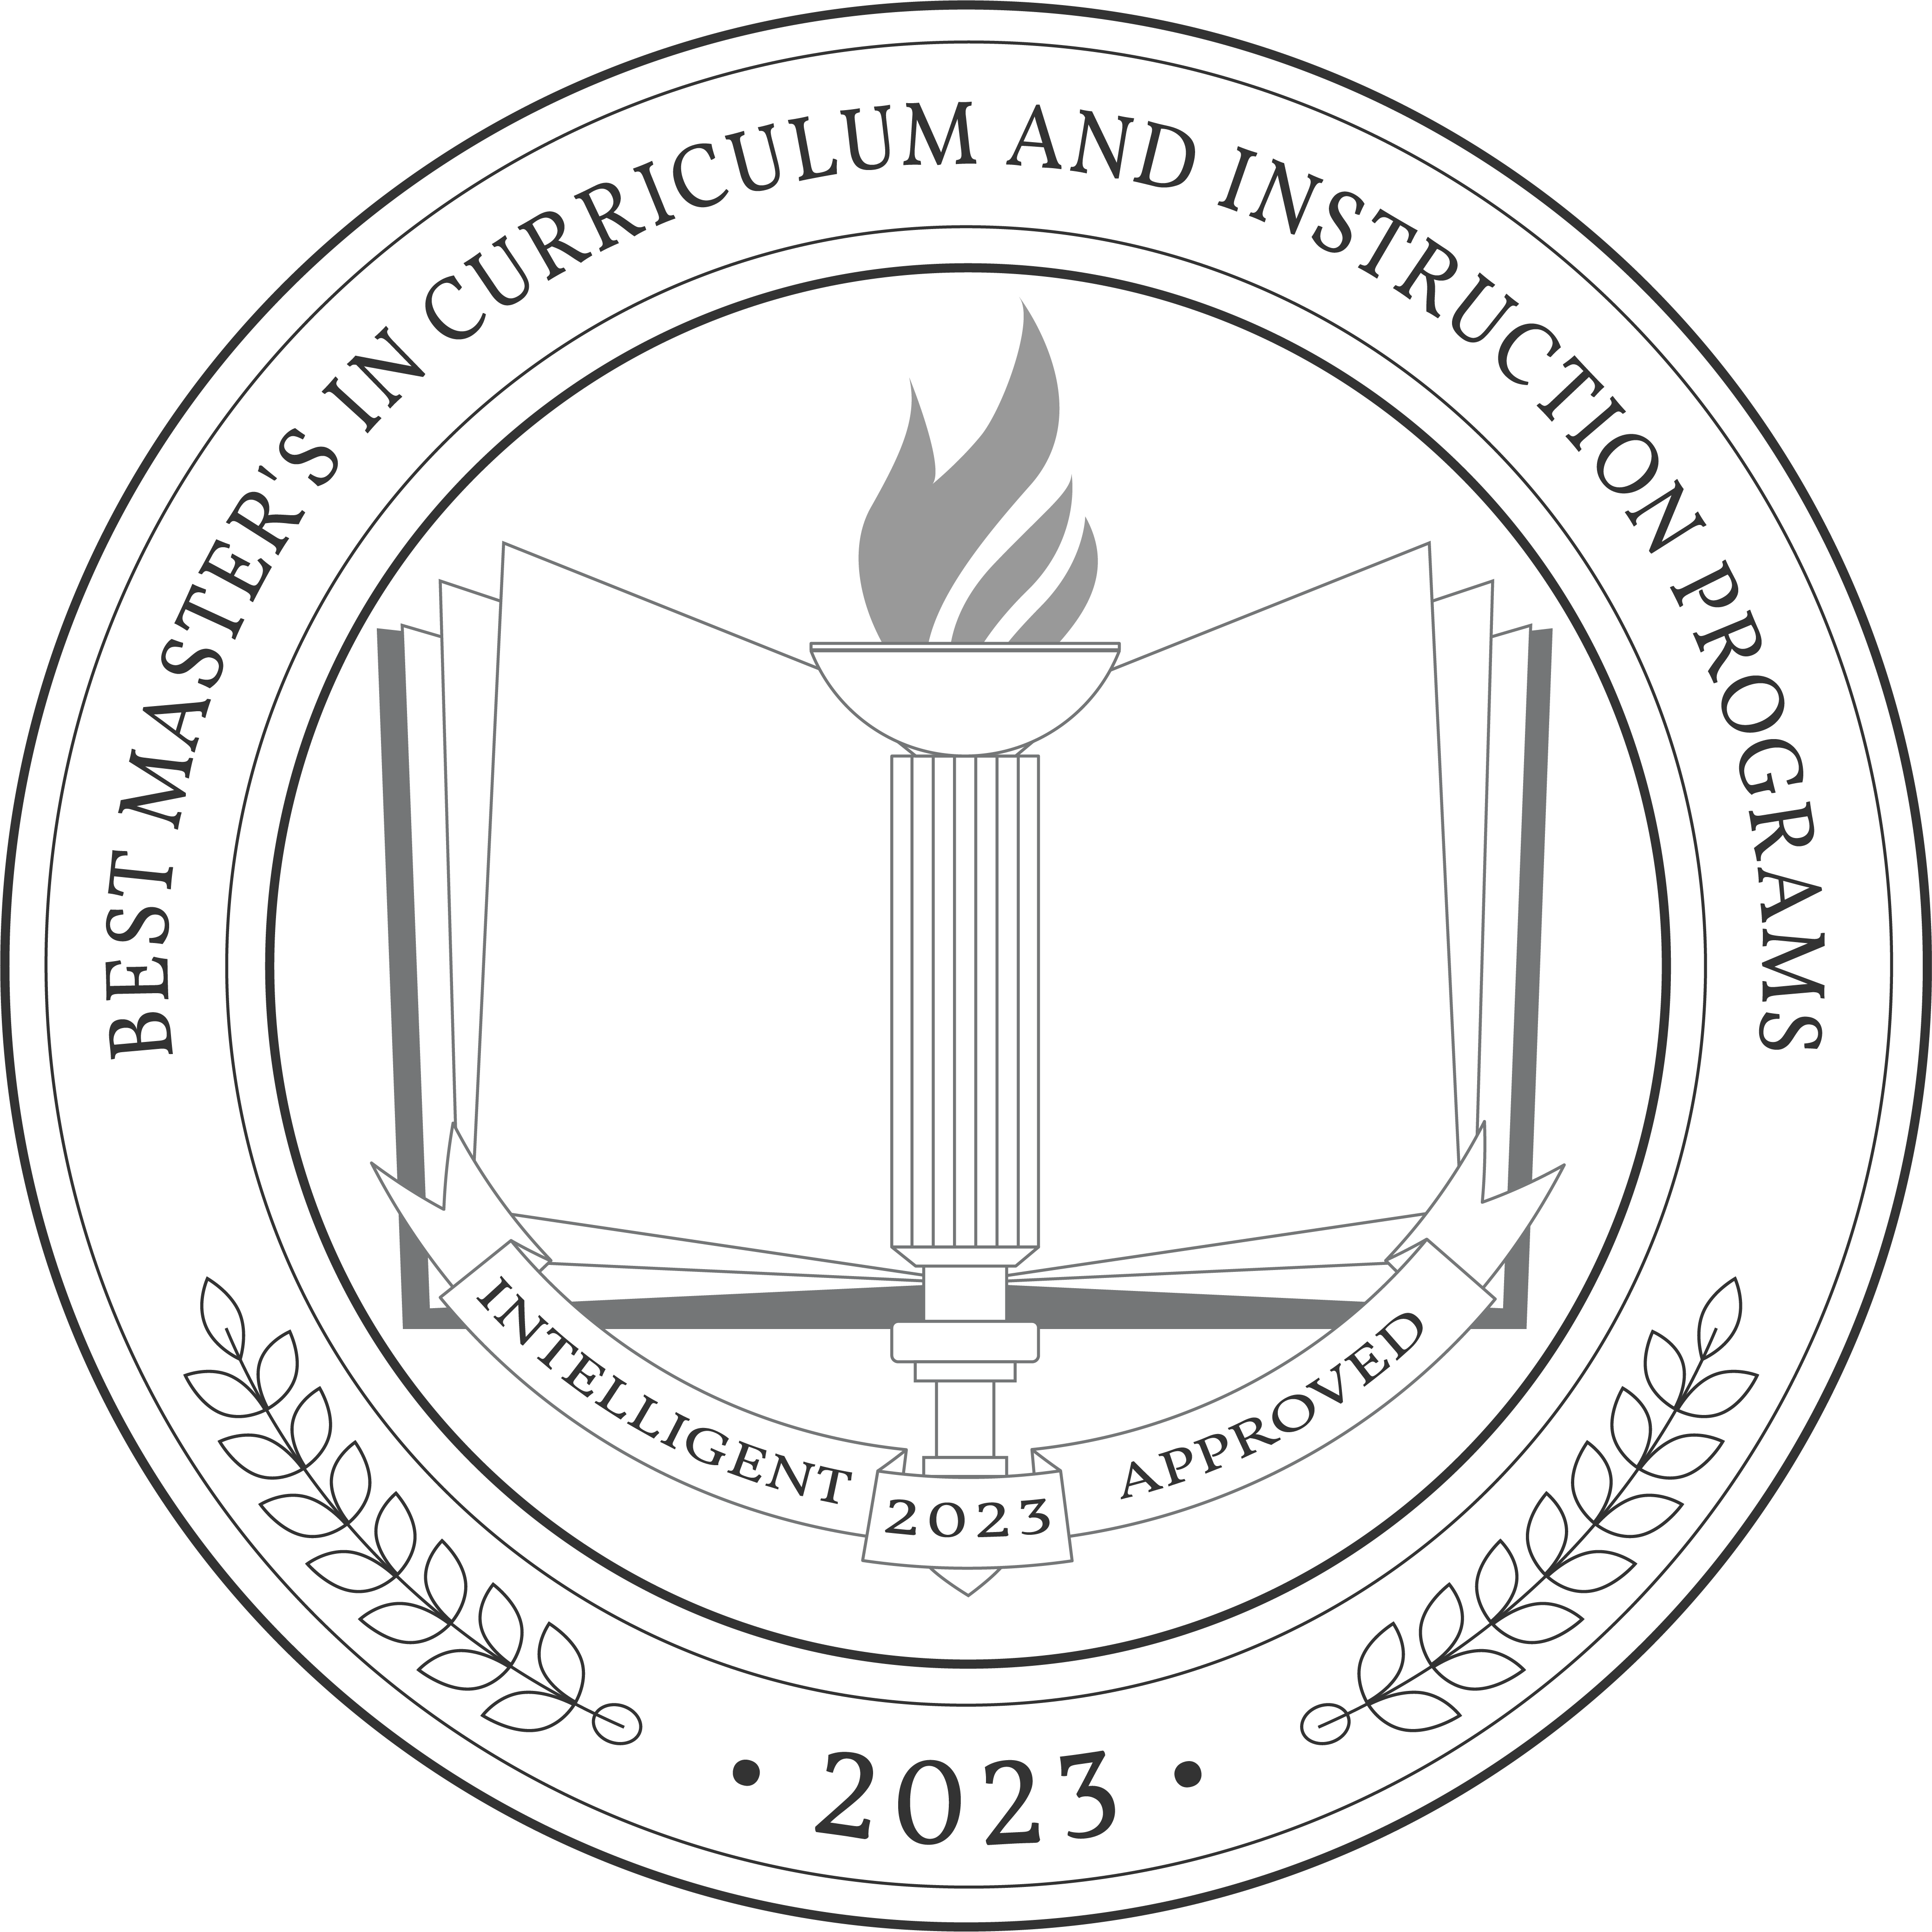 Best Master's in Curriculum And instruction Programs badge